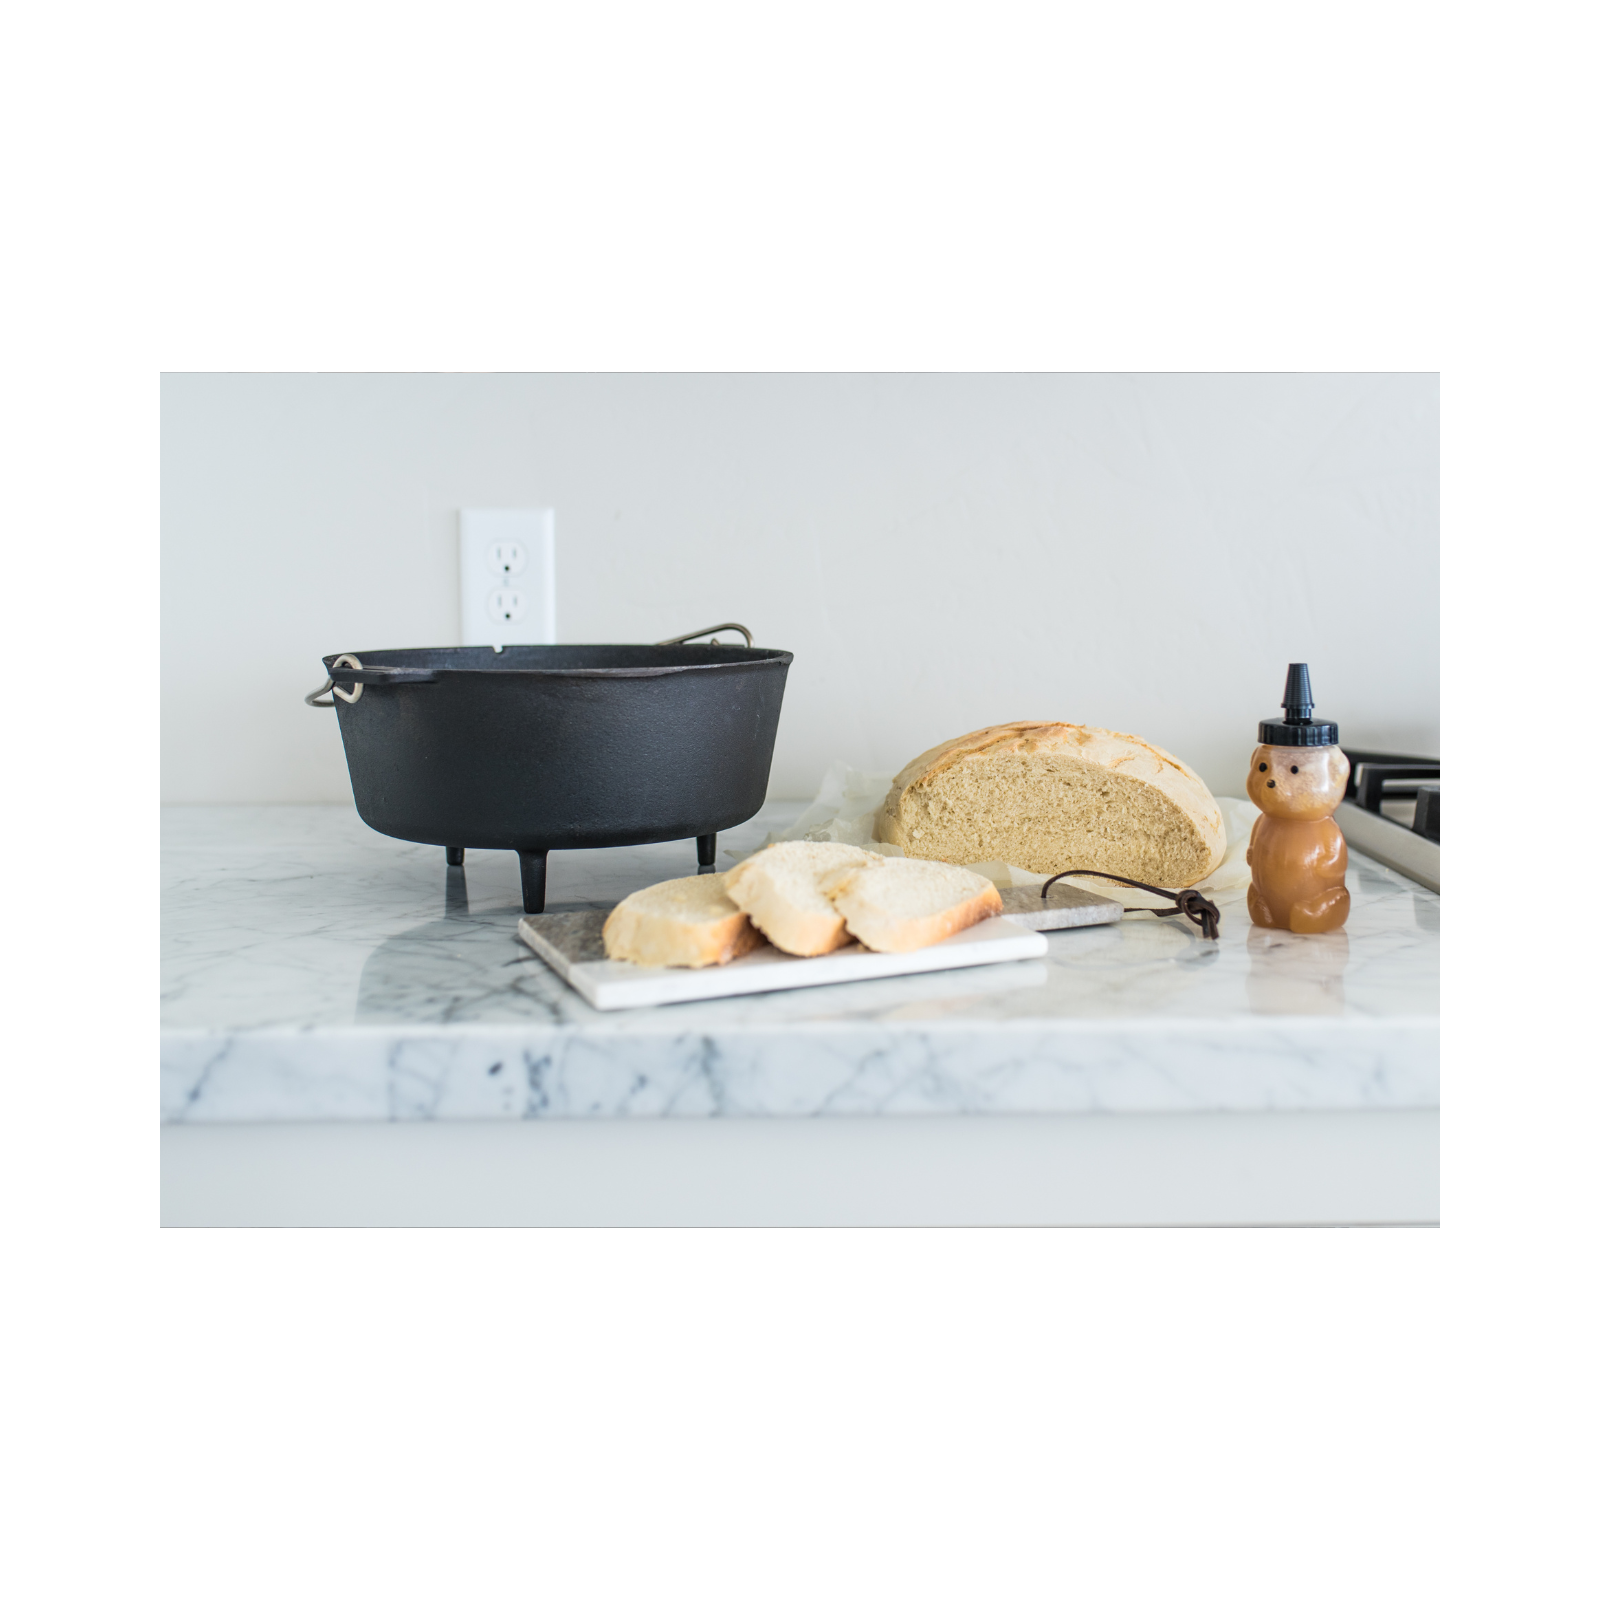 Camp Chef Deluxe Preseasoned Cast Iron 10 in. Dutch Oven DO10 - The Home  Depot